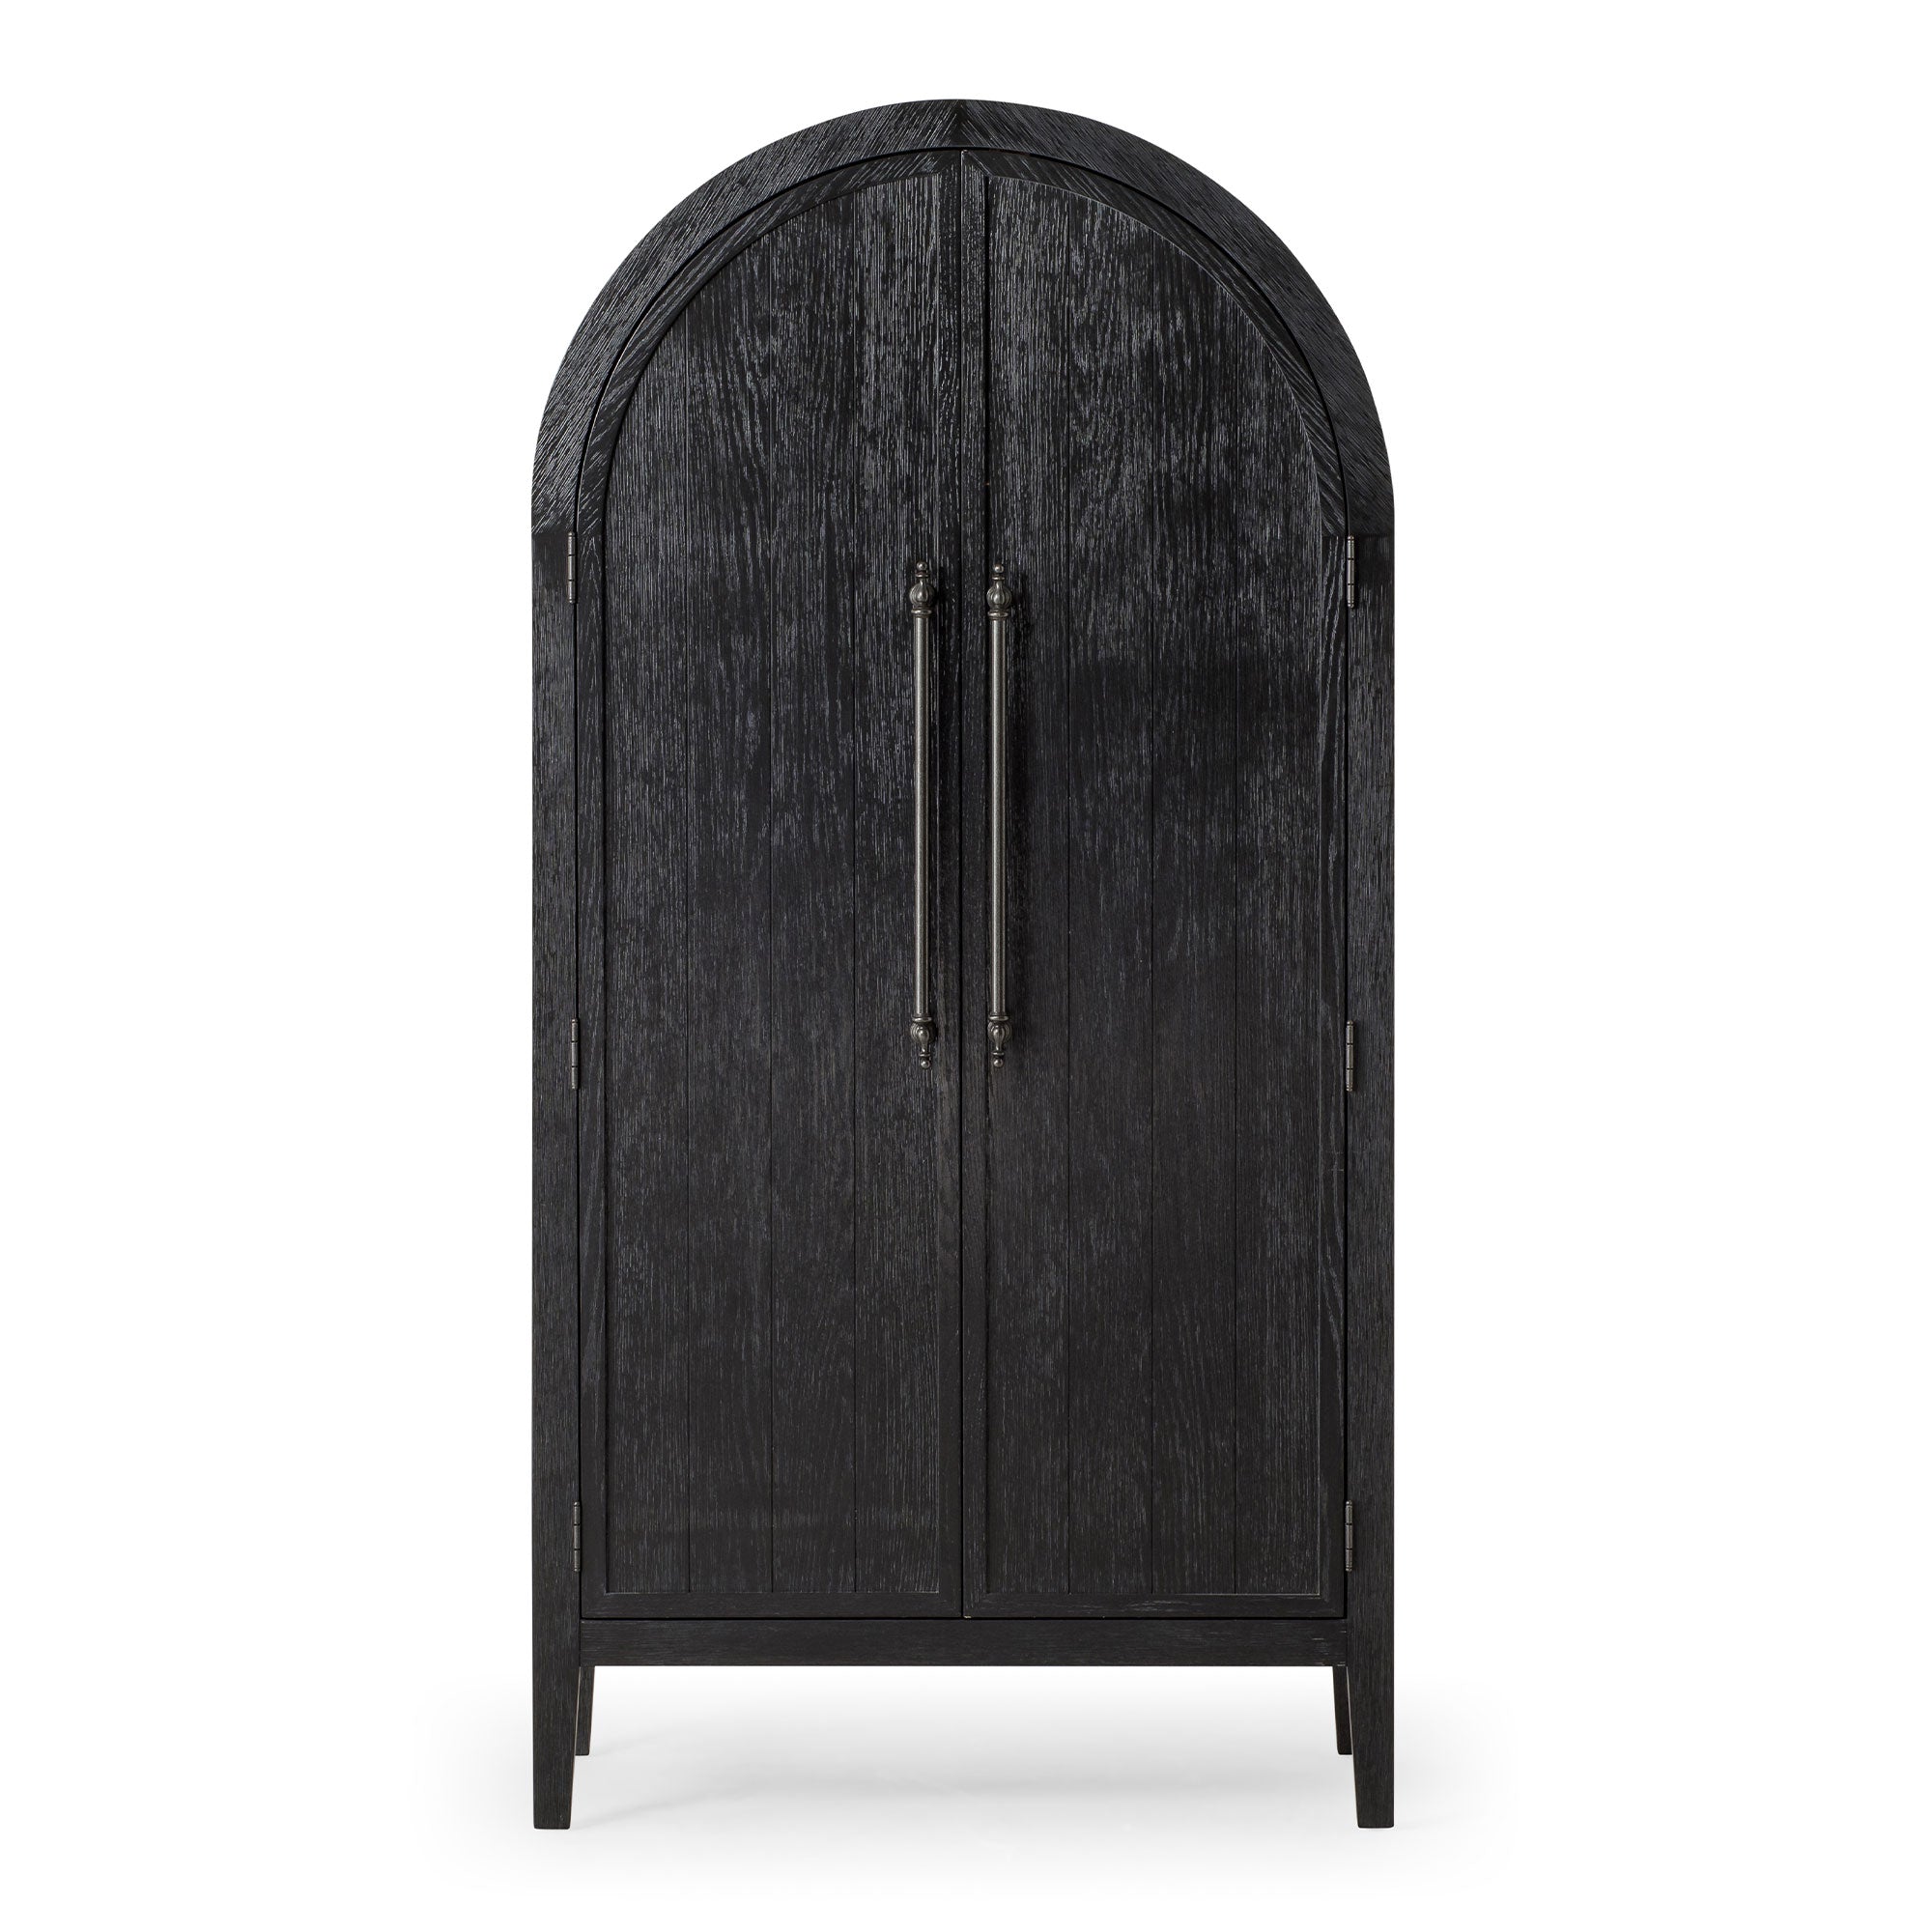 Selene Classical Wooden Cabinet in Antiqued Black Finish in Cabinets by Maven Lane